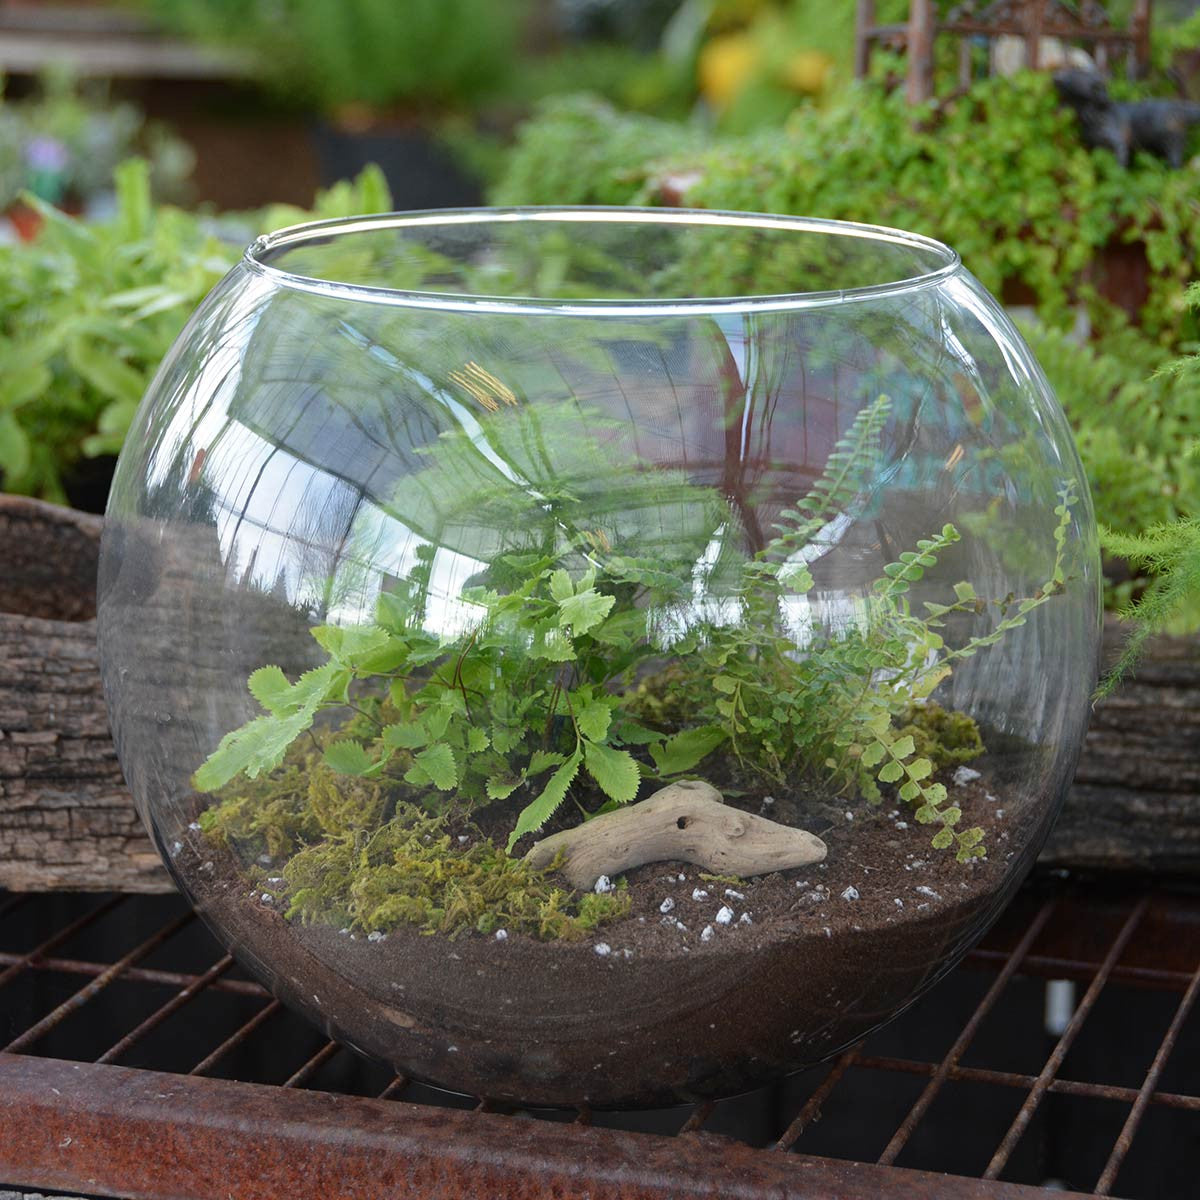 rose bowl terrarium filled with plants soil moss and driftwood